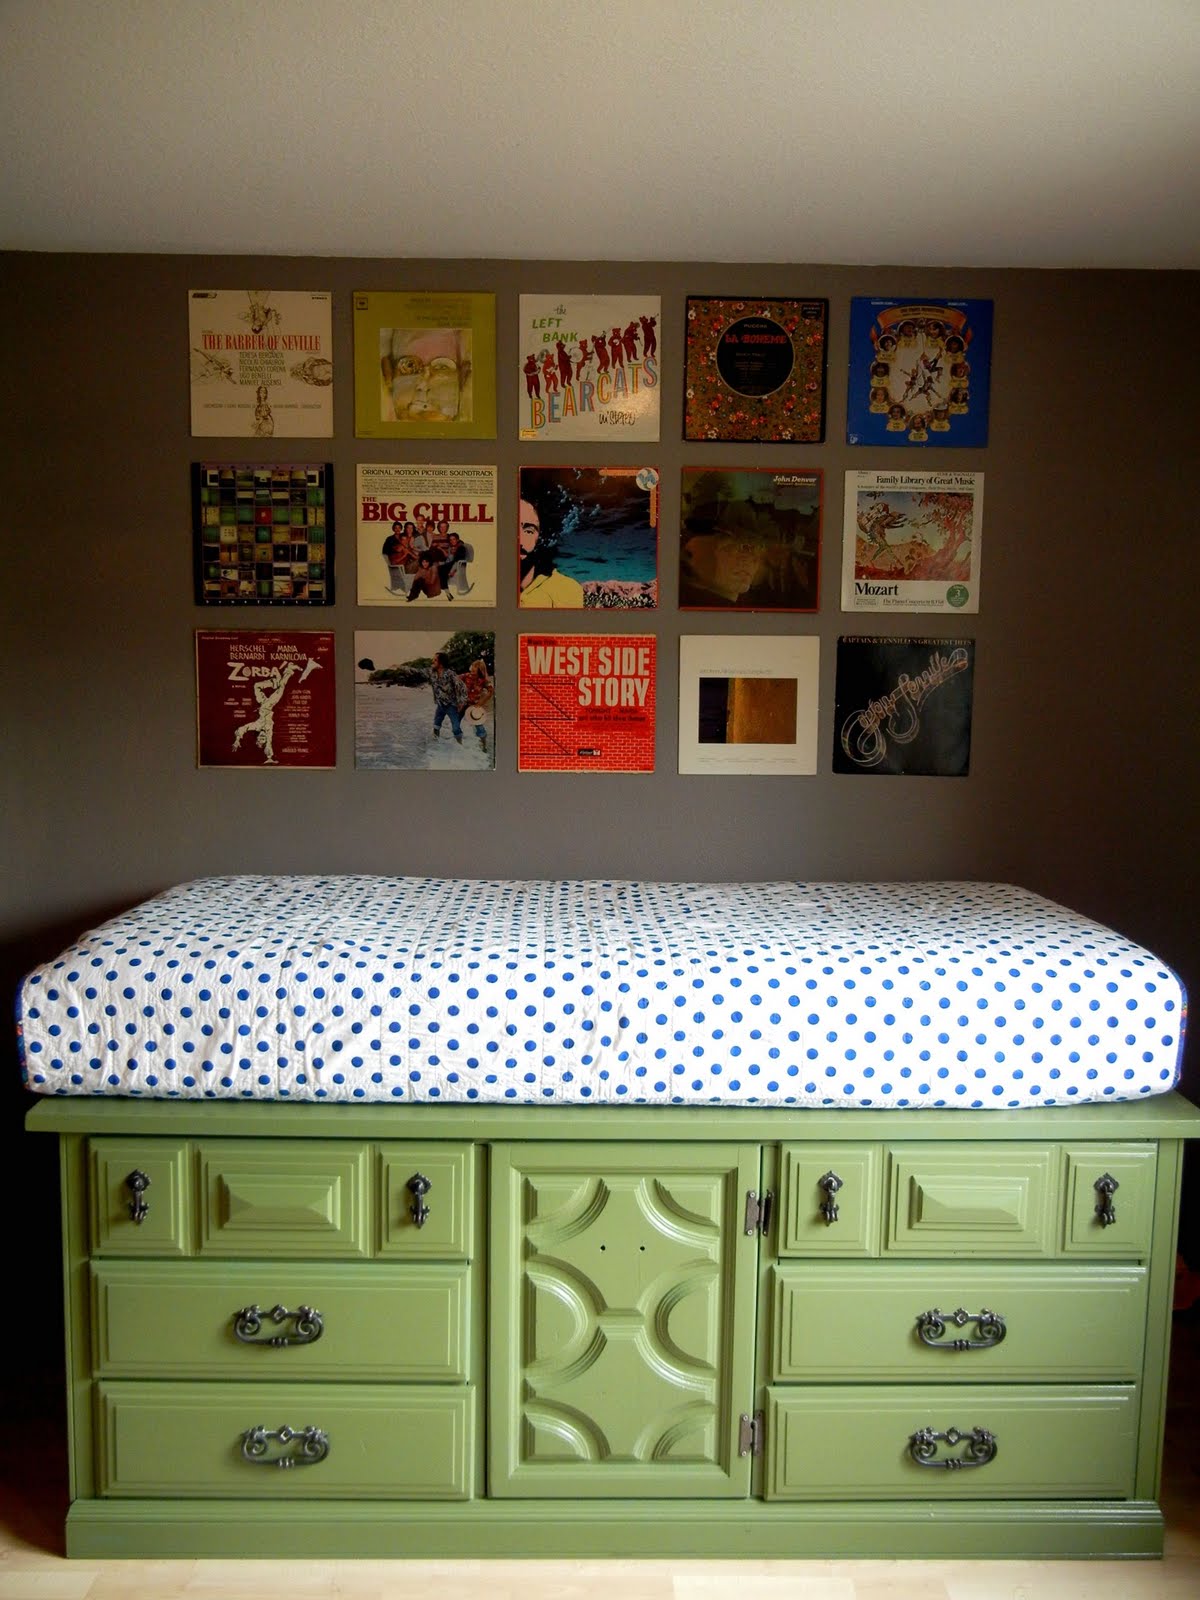 4. SIMPHOME.COM Upcycling Chest of Drawers into a Twin Bed